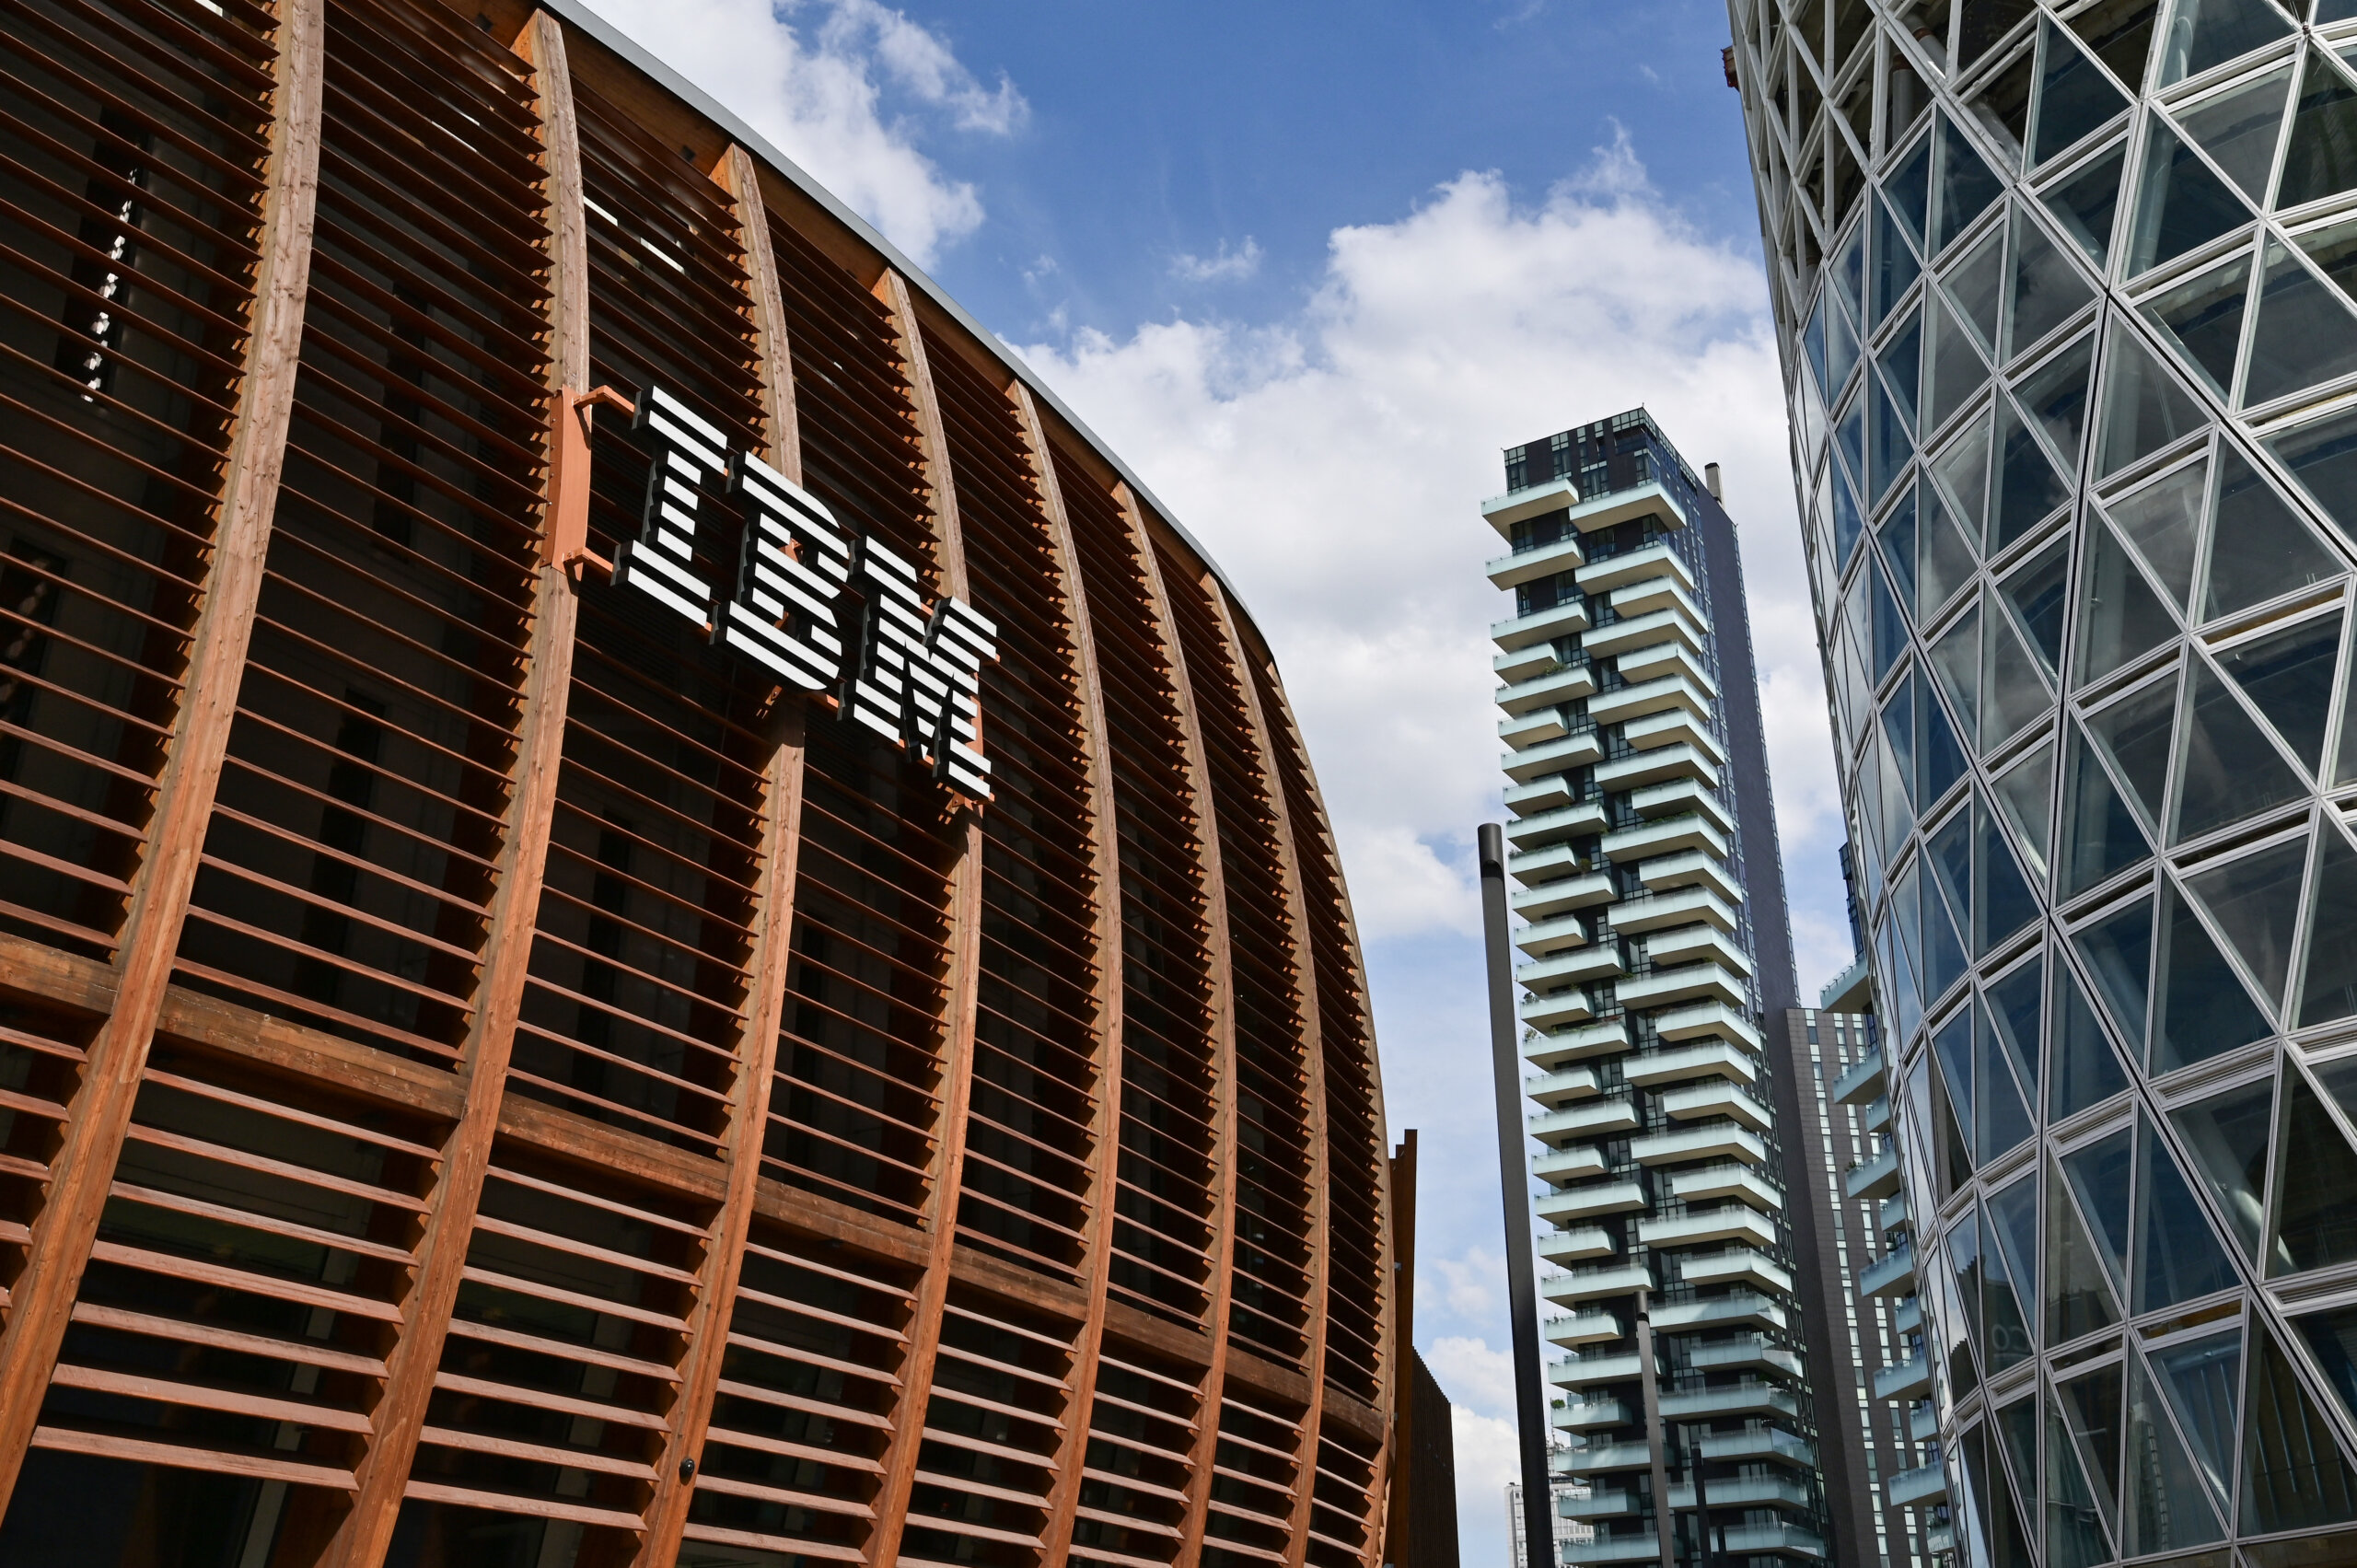 IBM aims to reskill 30 million people by 2030 for future technology jobs